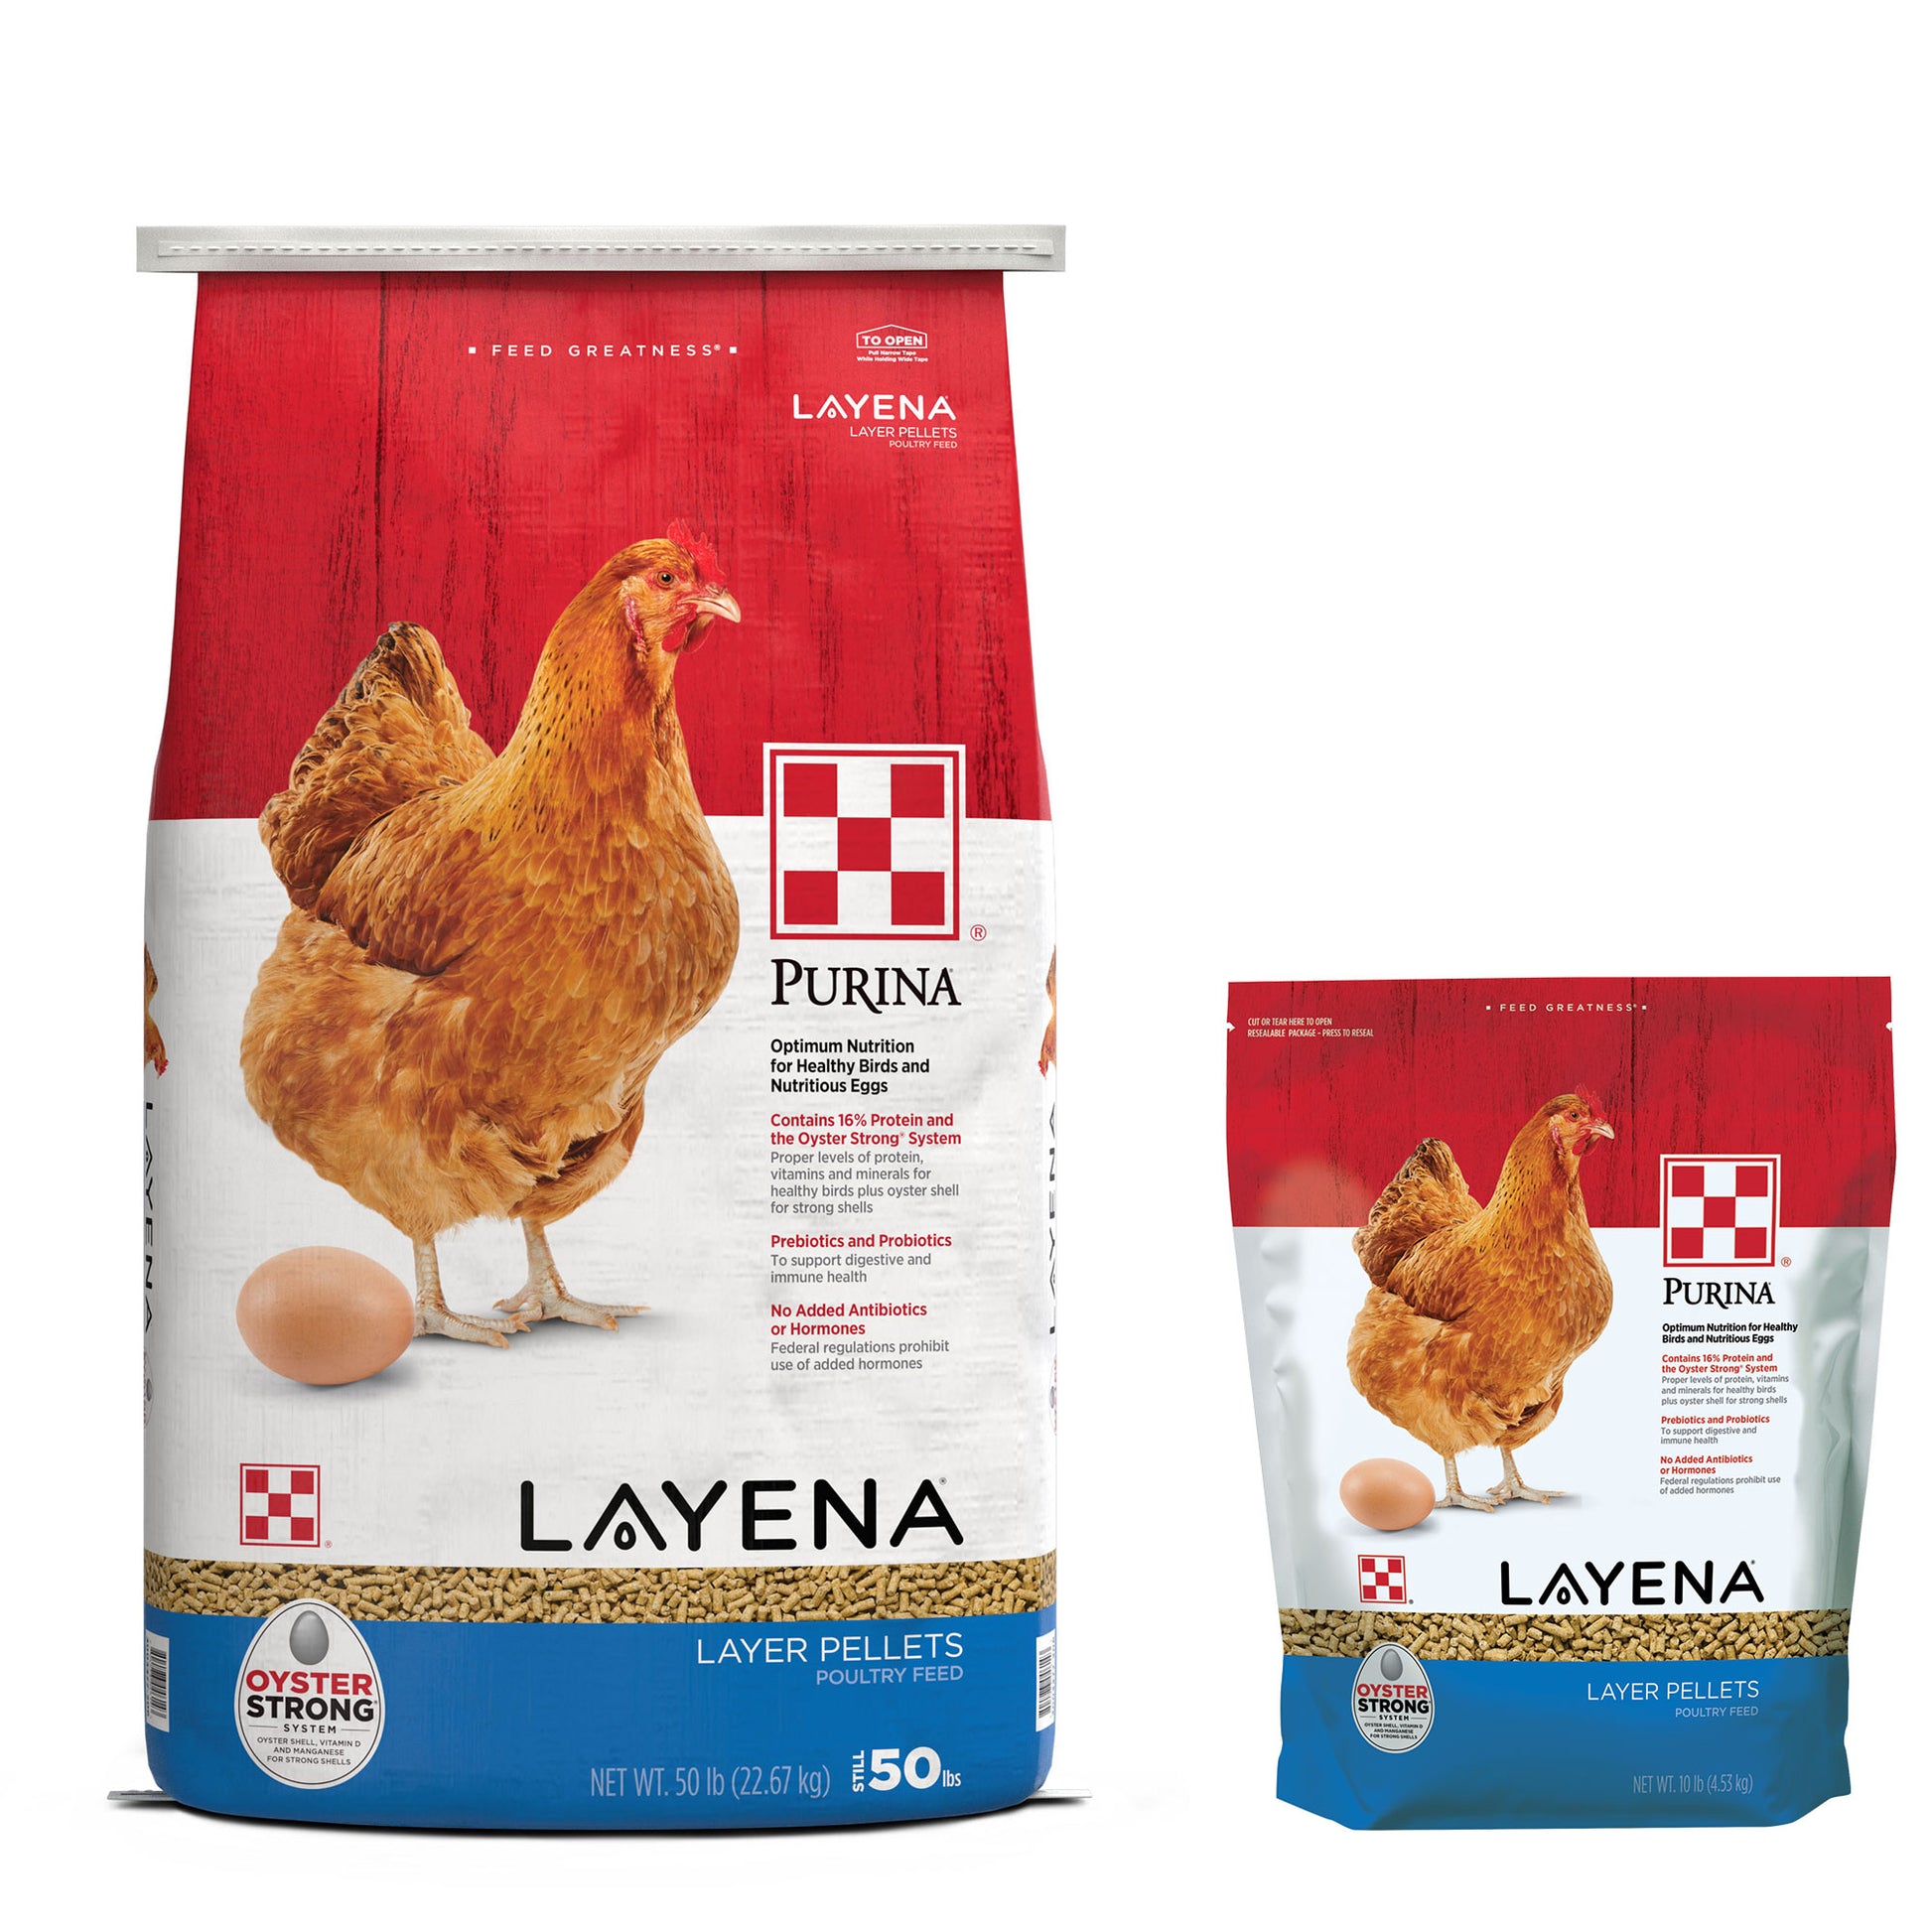 Purina Layena Pellets 50 Pound Bag and 10 pound pouch grouped together